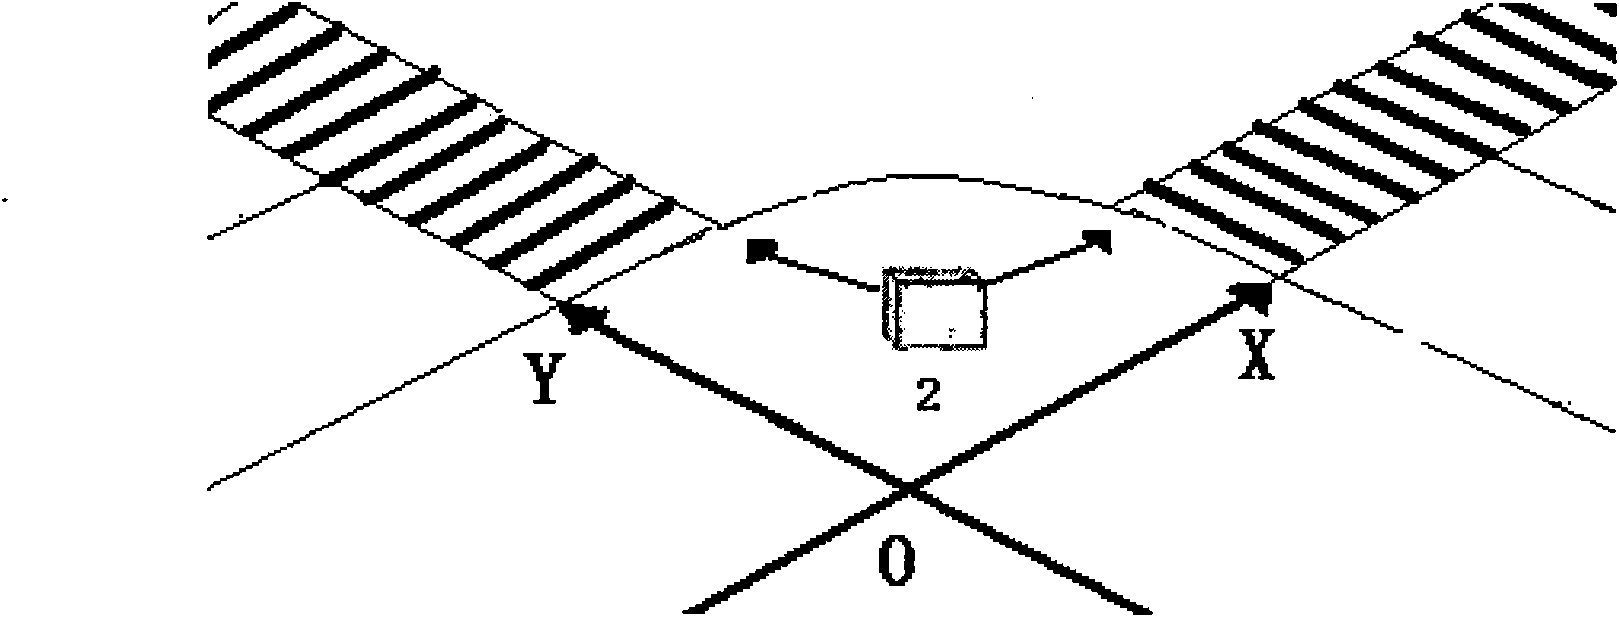 Road junction traffic conflict detection and safety evaluation method based on two-dimensional laser scanners